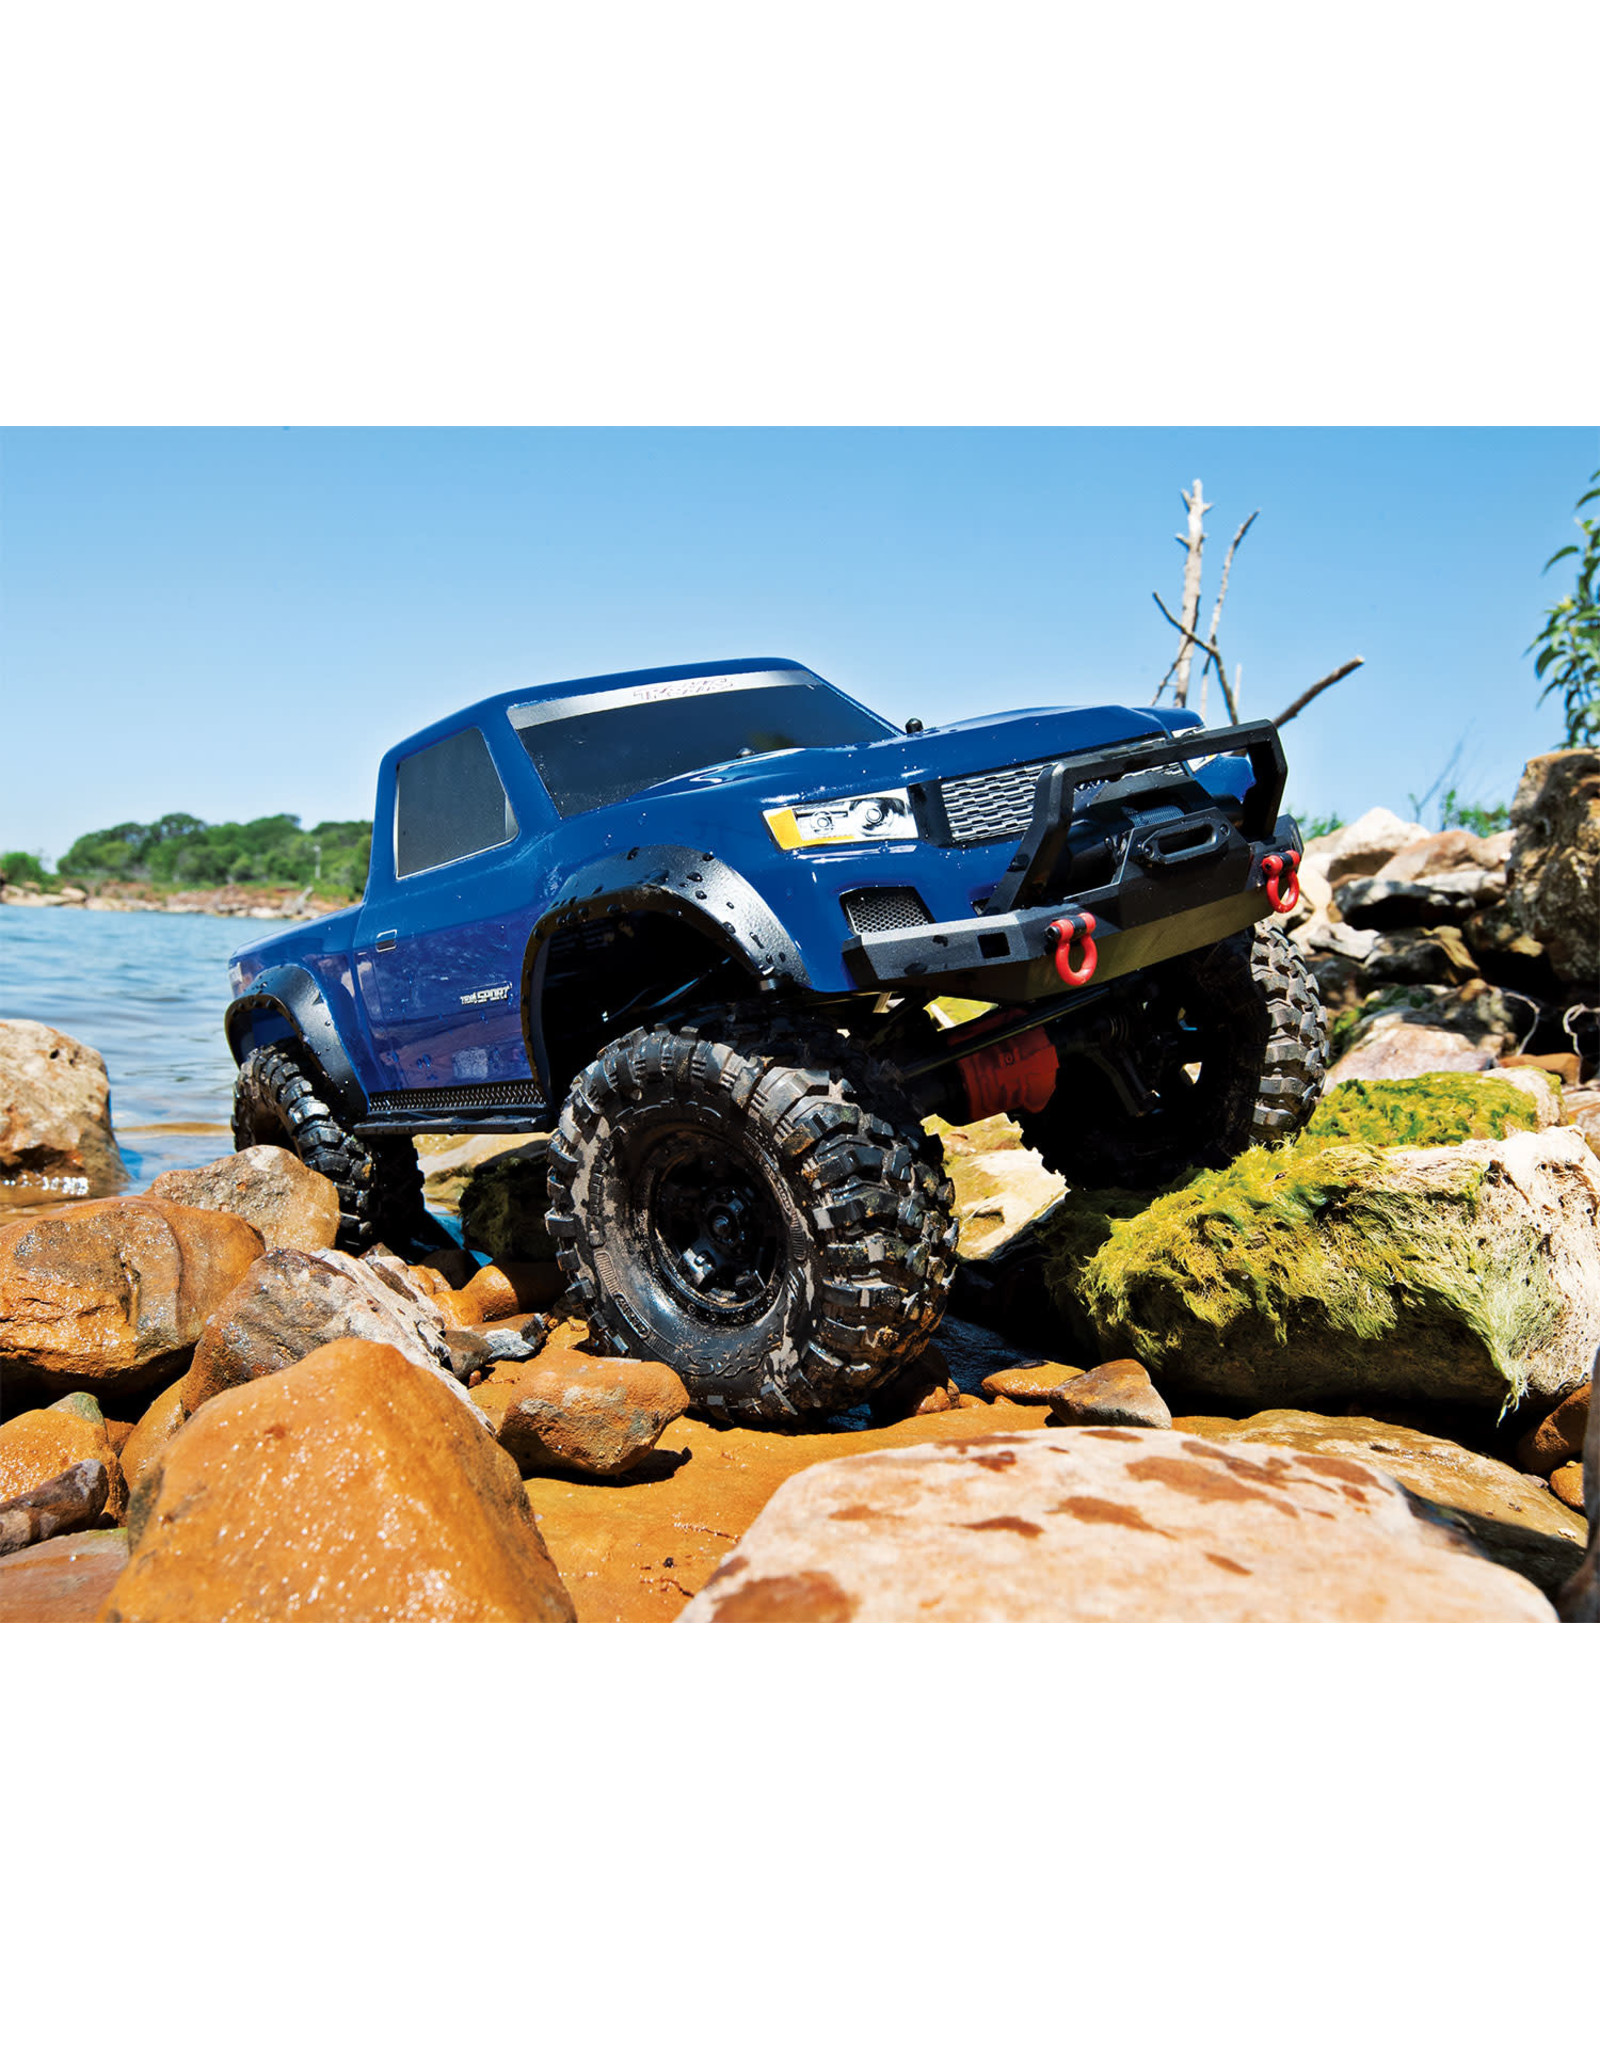 Traxxas The Traxxas TRX-4 Sport is a technical powerhouse purpose-built from the ground up to conquer any terrain.